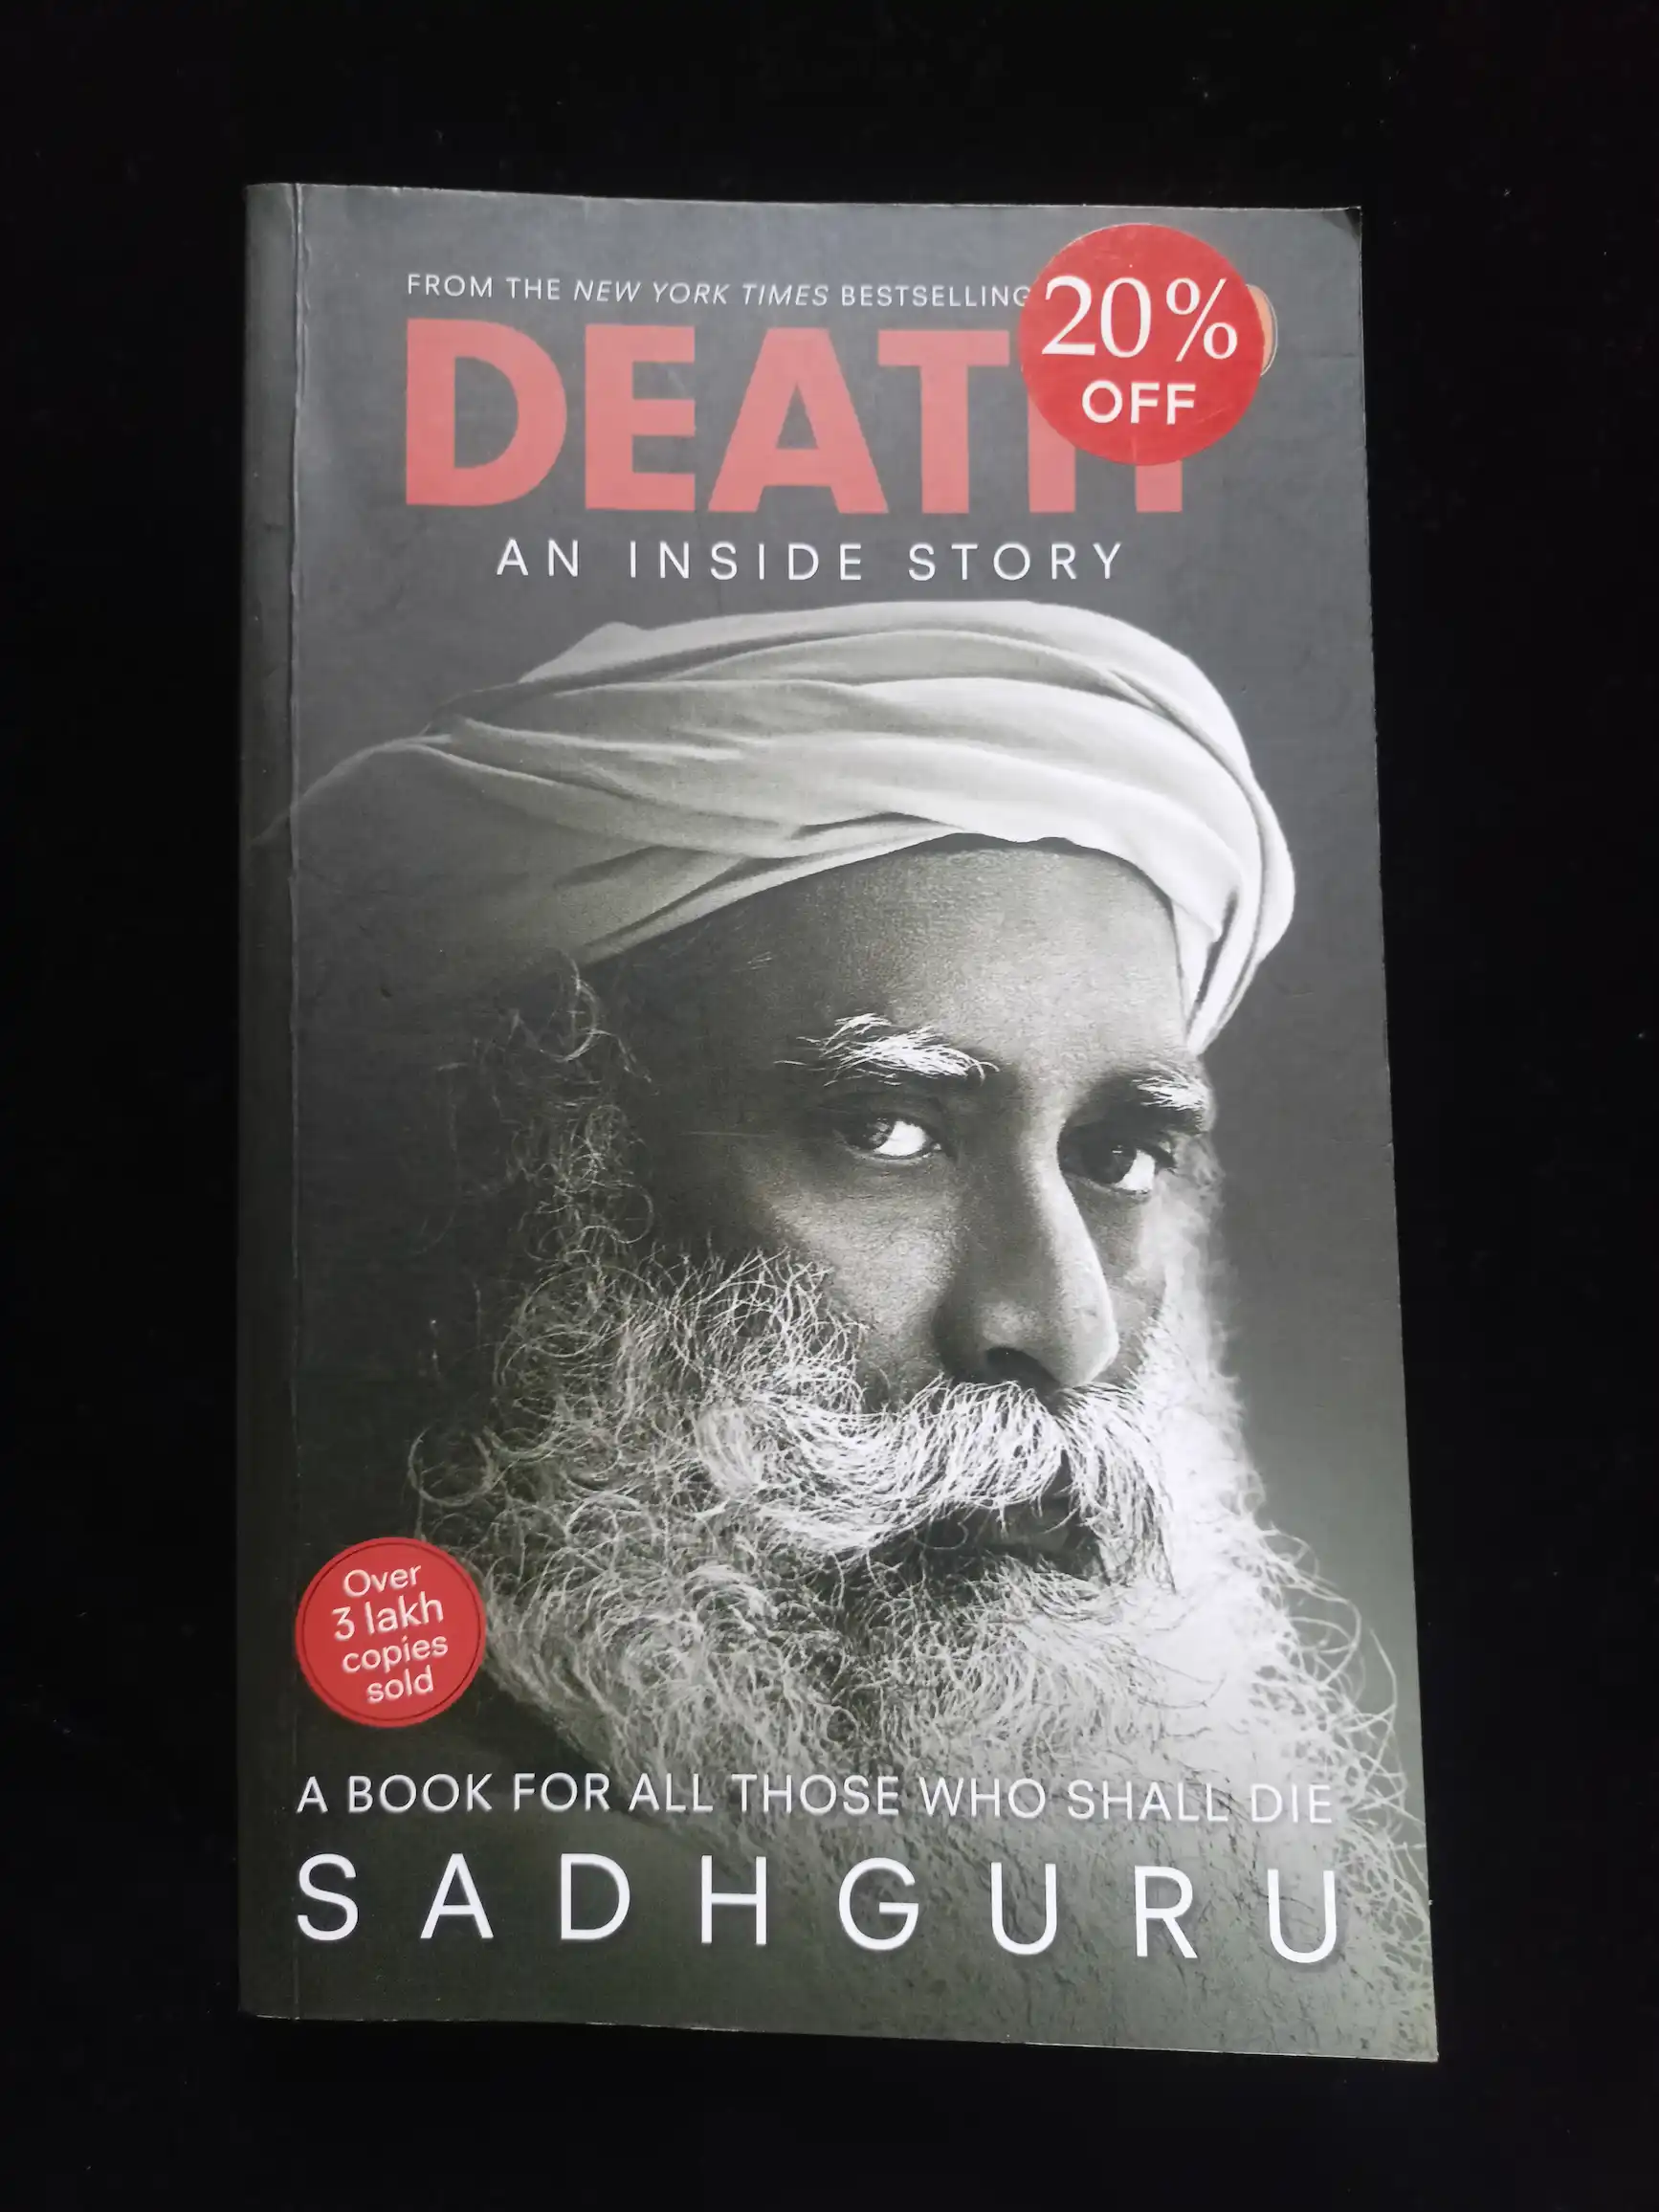 5 things to learn from Sadhguru’s ‘Death’